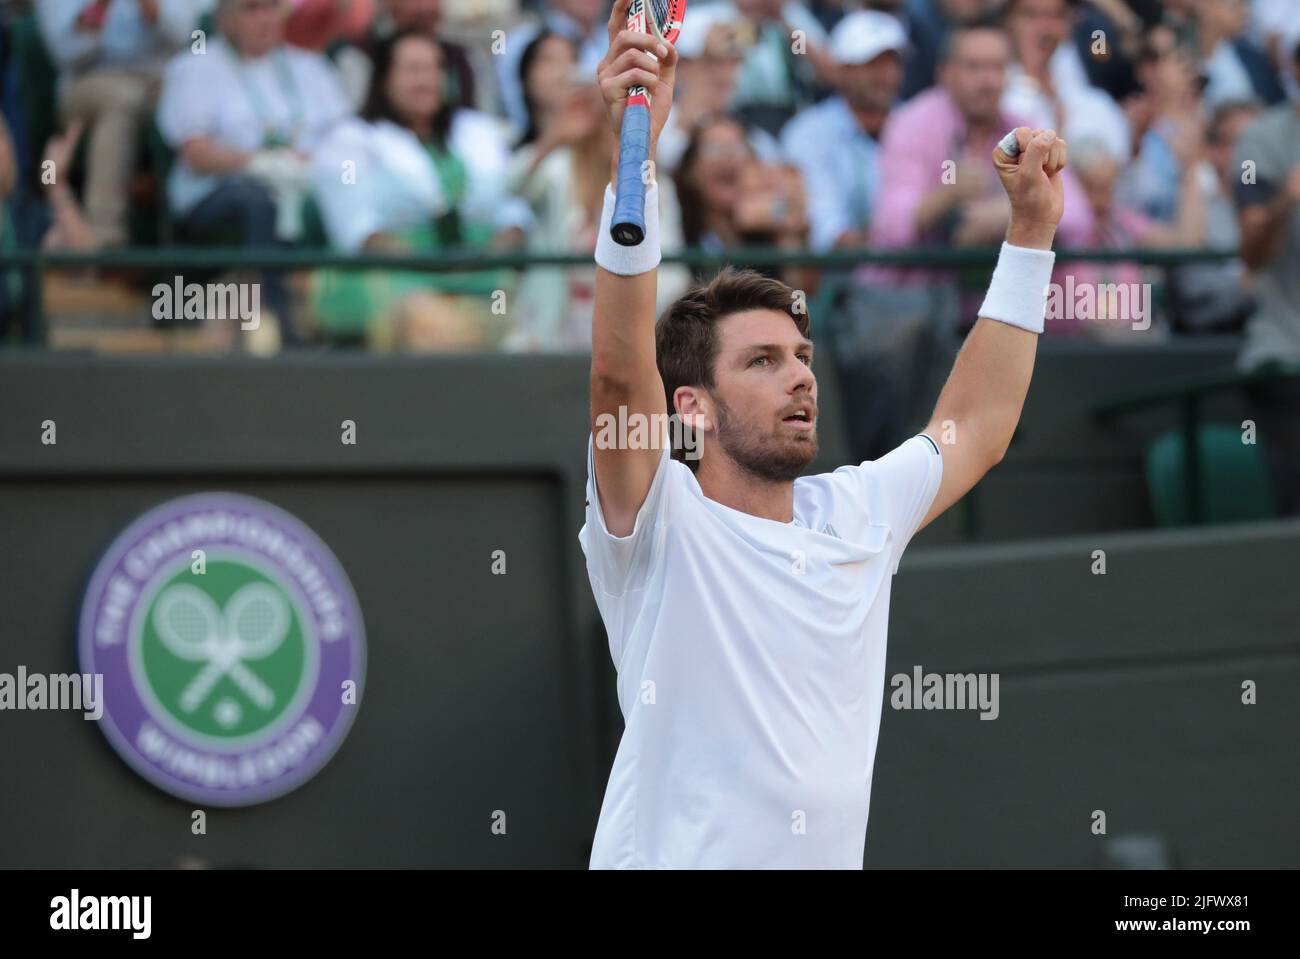 London, UK. 05th July, 2022. Great Britain's Cameron Norrie celebrates during in his Quarter-Final match against Belgian David Goffin on day nine of the 2022 Wimbledon championships in London onTuesday, July 05, 2022. Norrie won the match 3-6, 7-5, 2-6, 6-3, 7-5. Photo by Hugo Philpott/UPI Credit: UPI/Alamy Live News Stock Photo